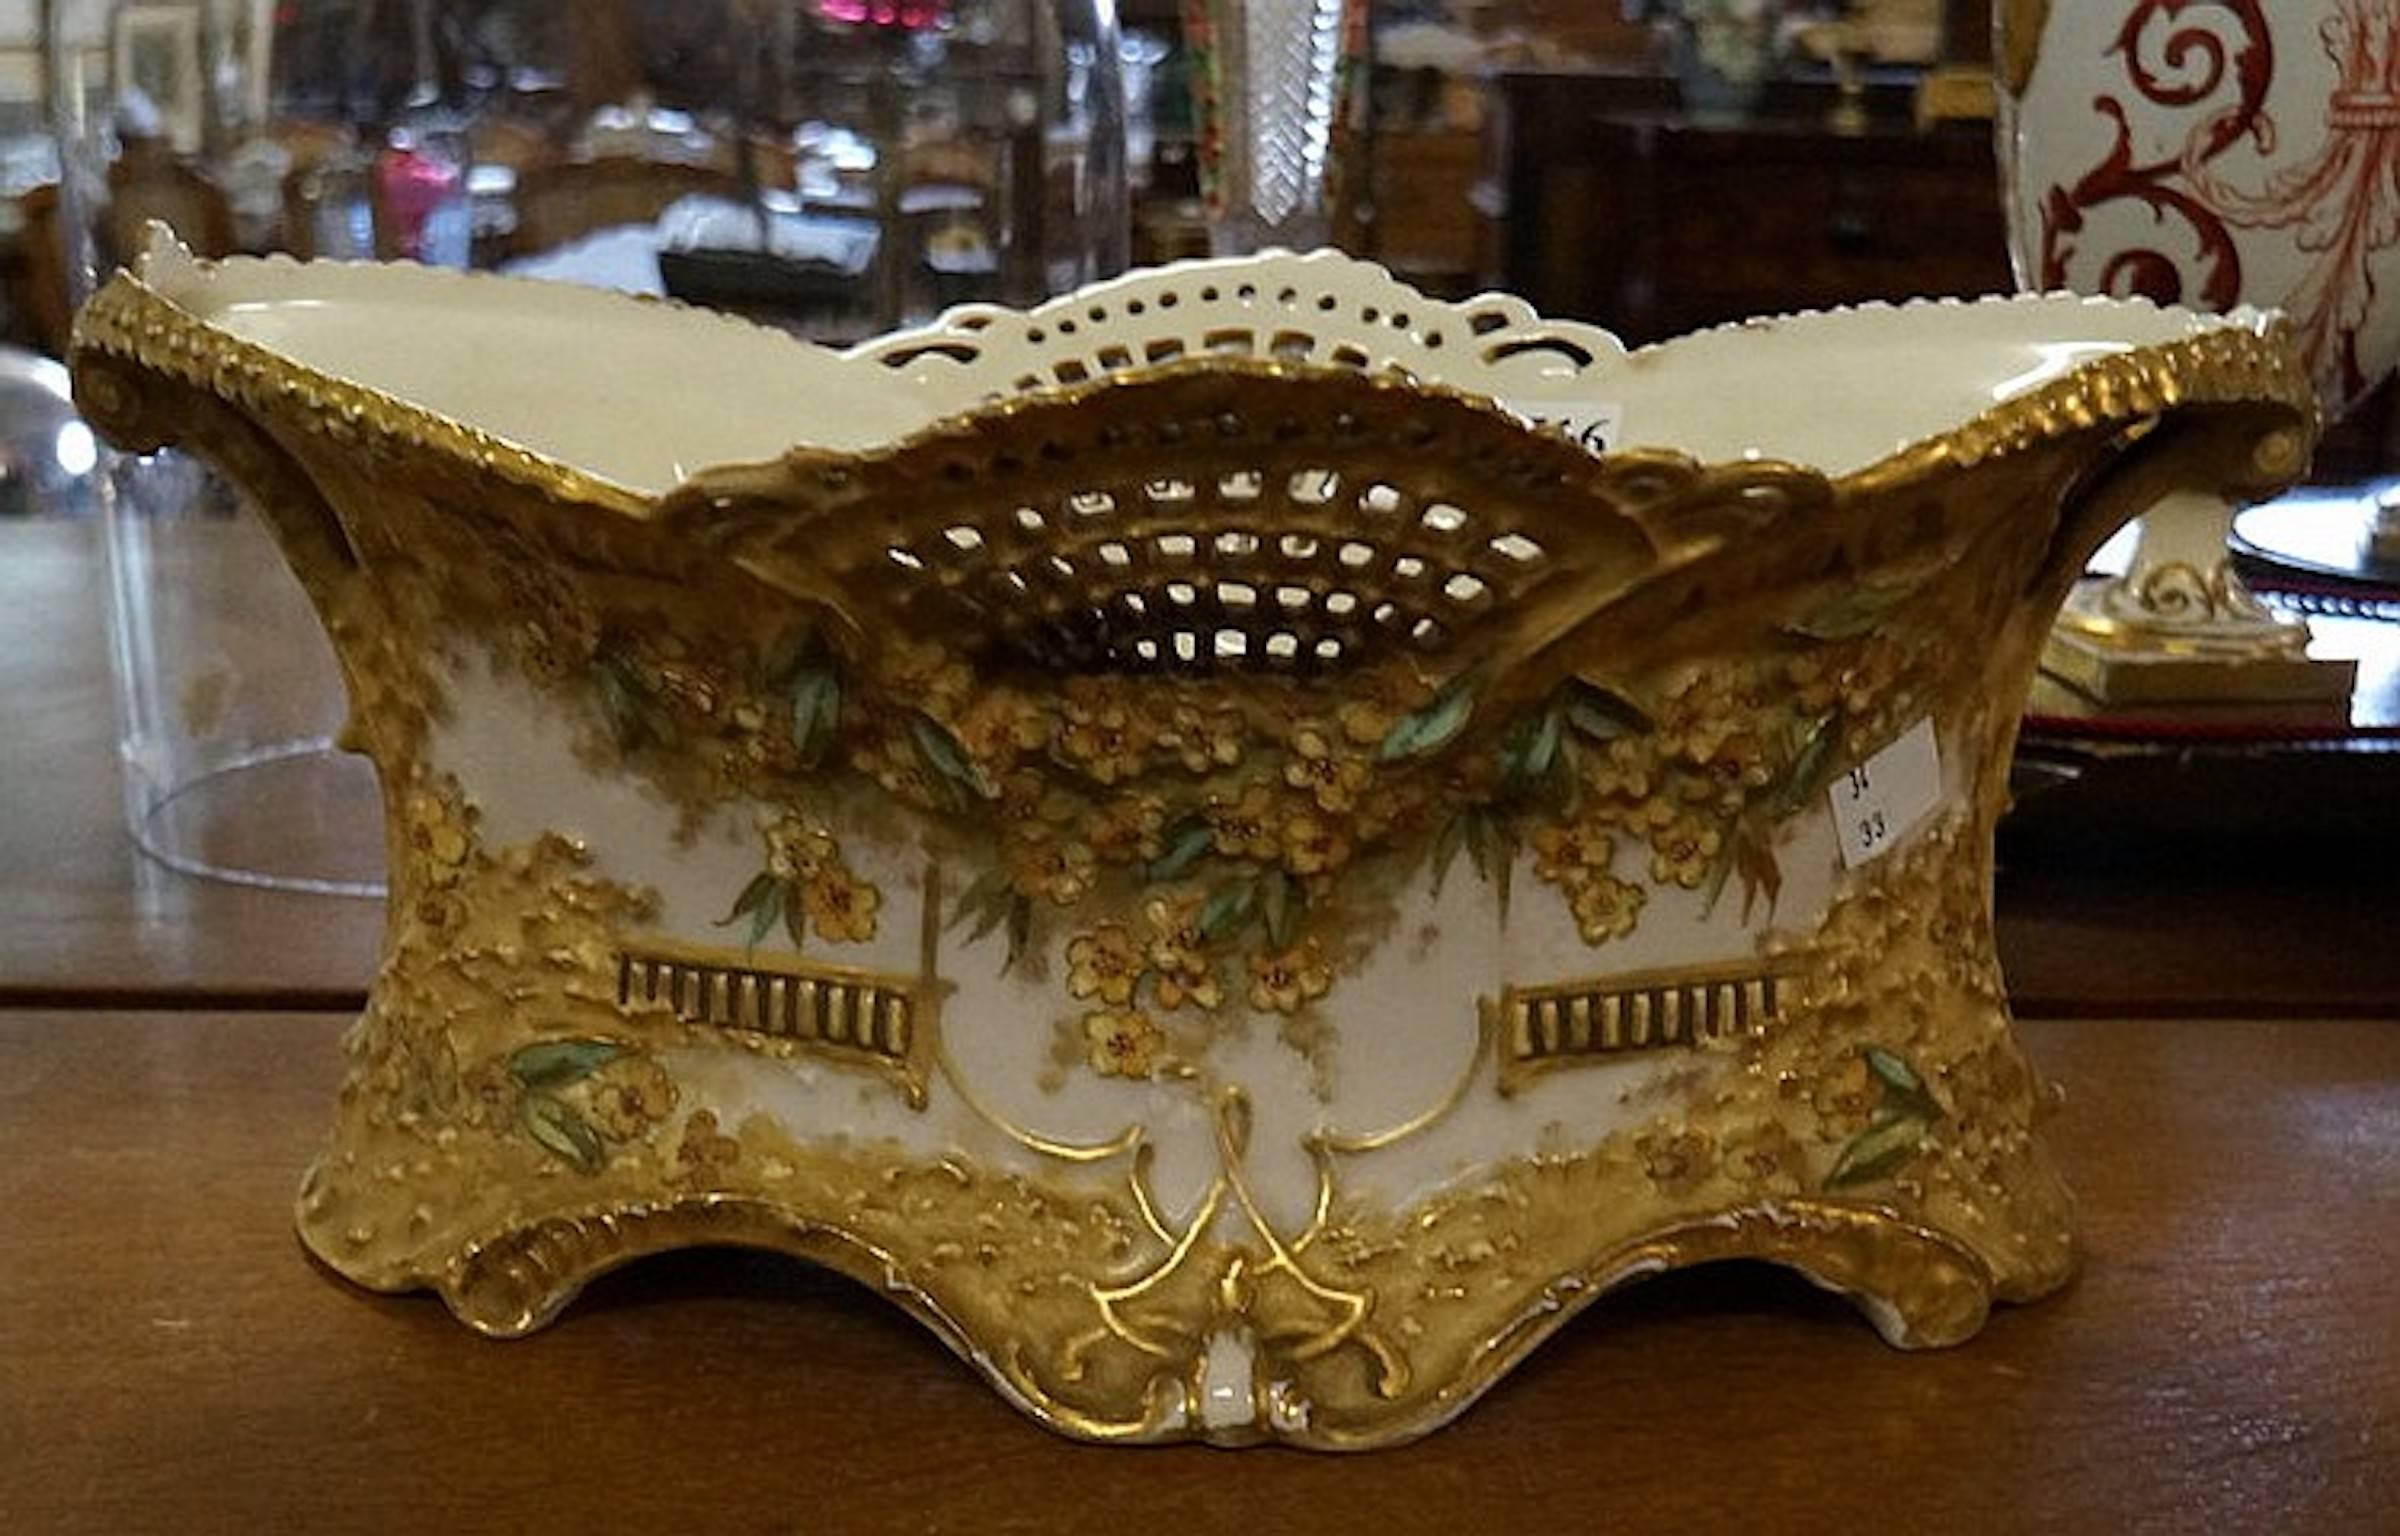 19th century gilded and hand-painted floral jardiniere.
Stamped Wien Teplitz Austria.